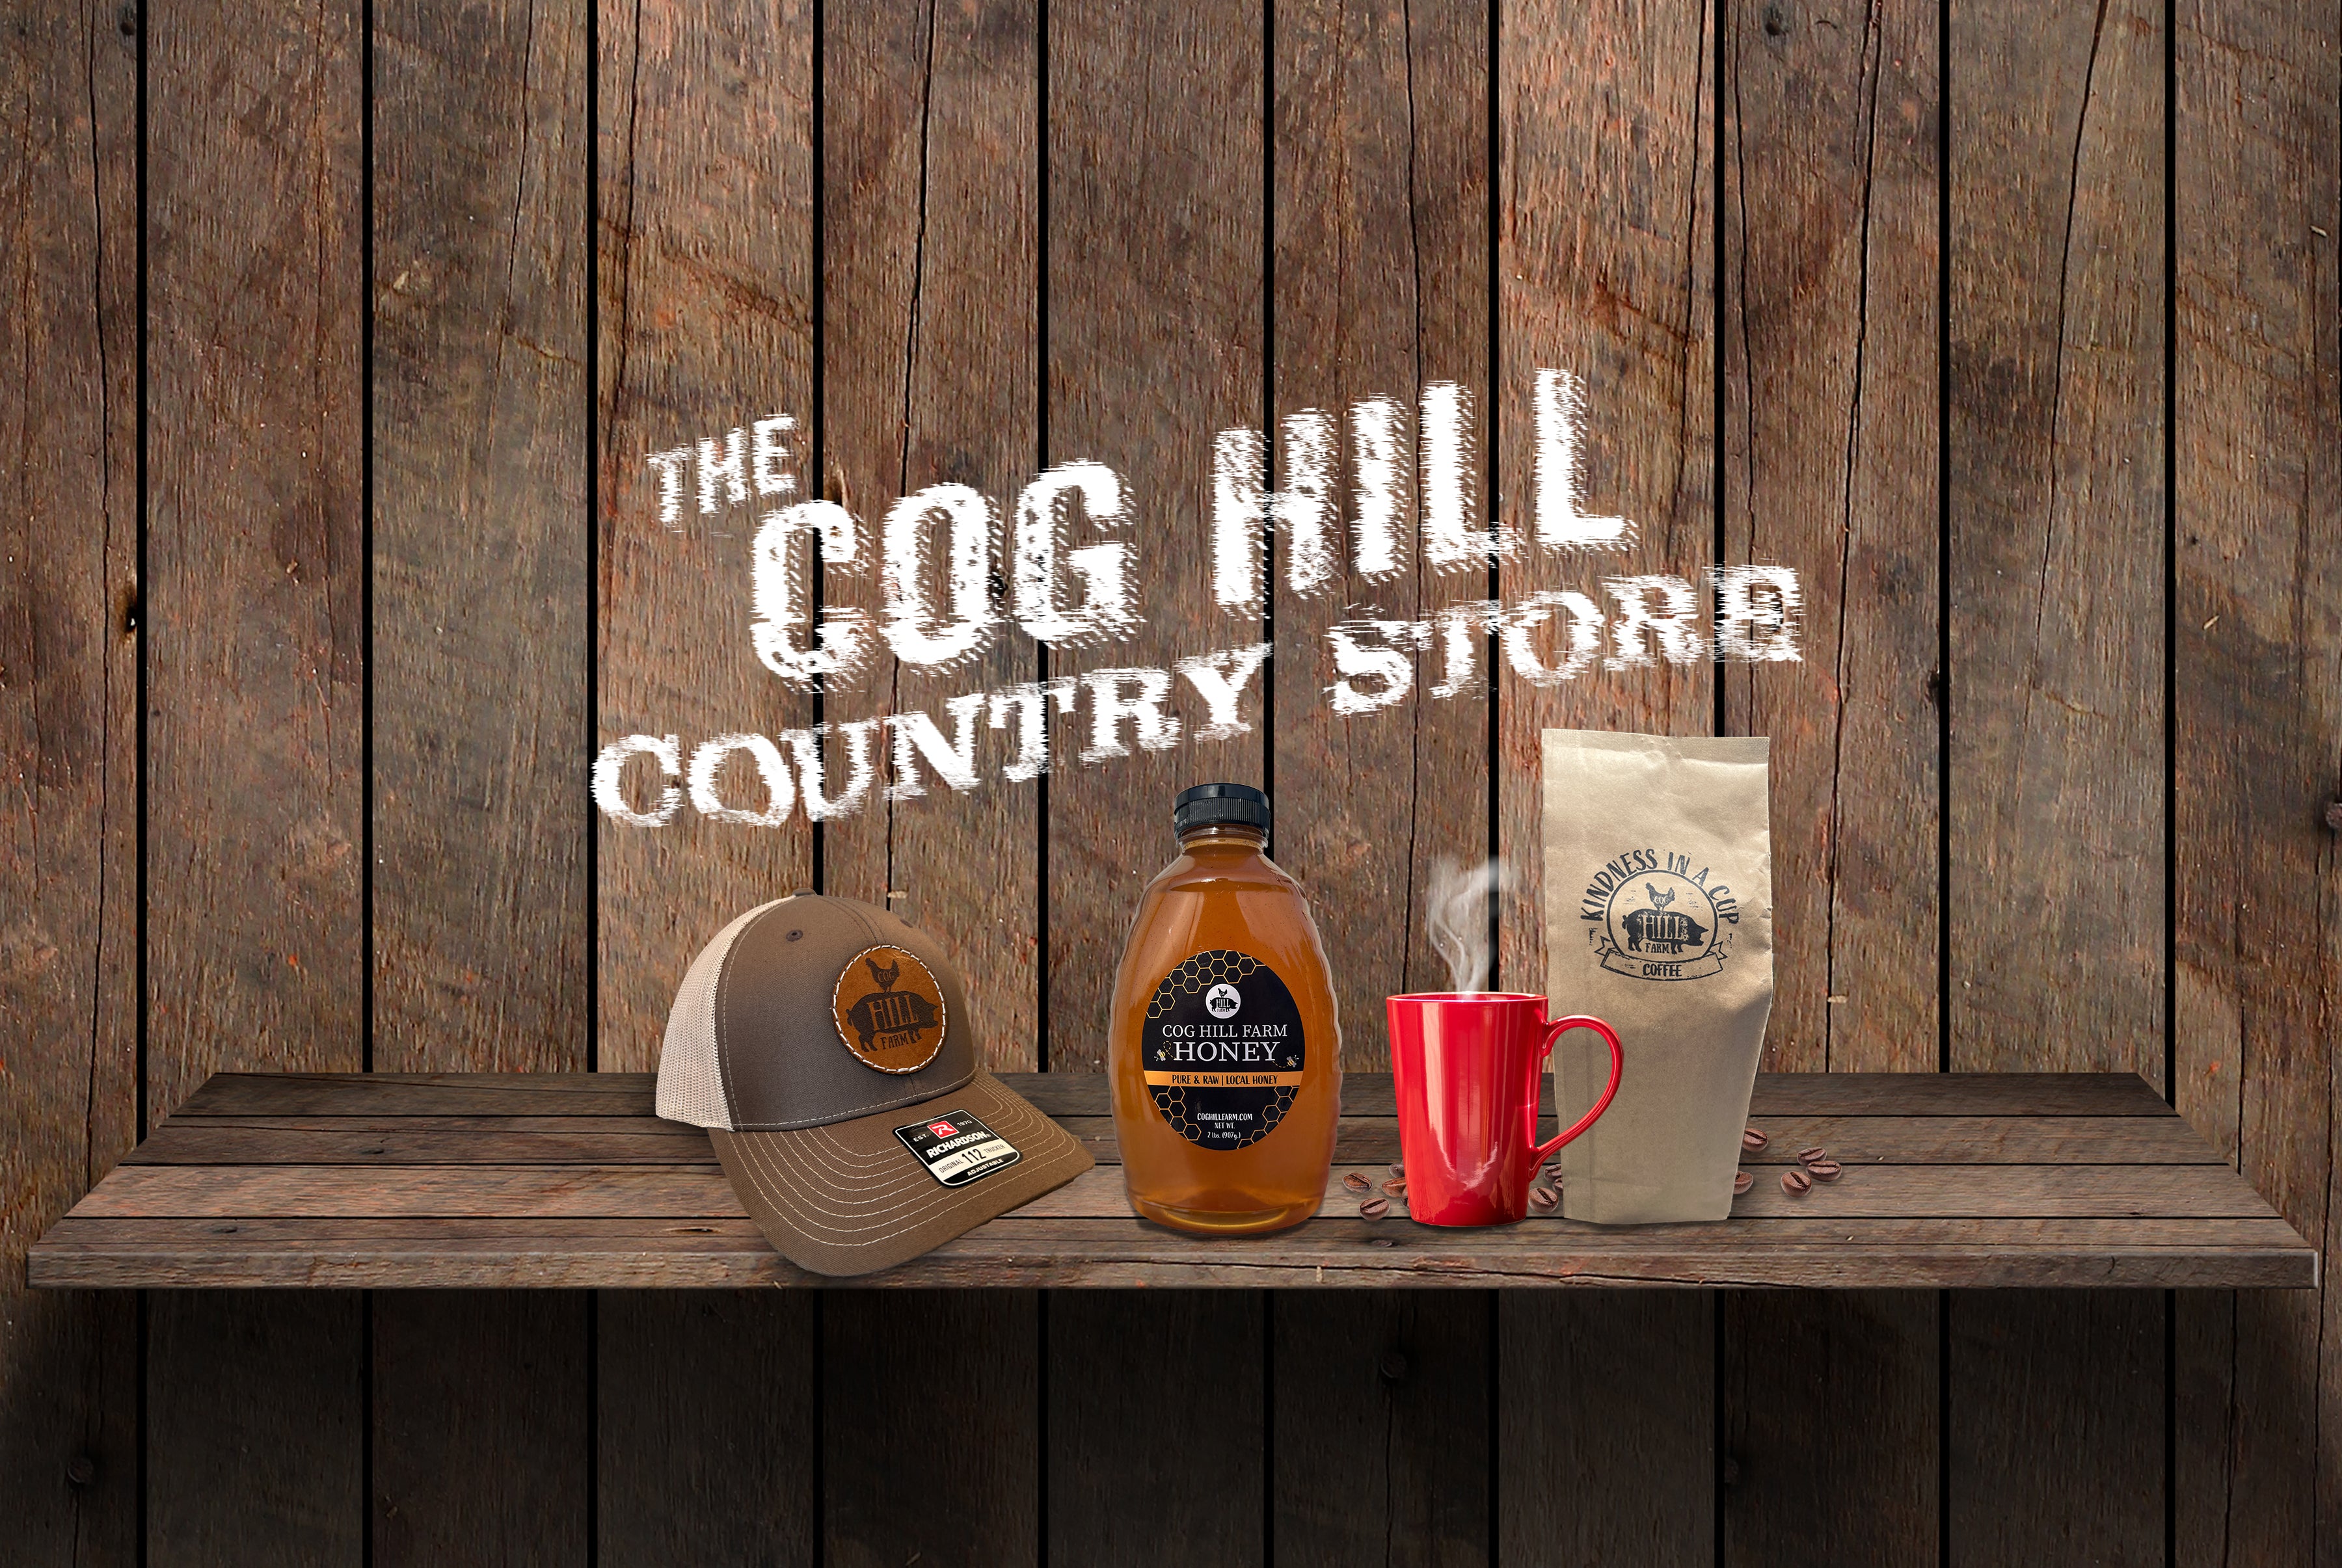 Cog Hill Country Store